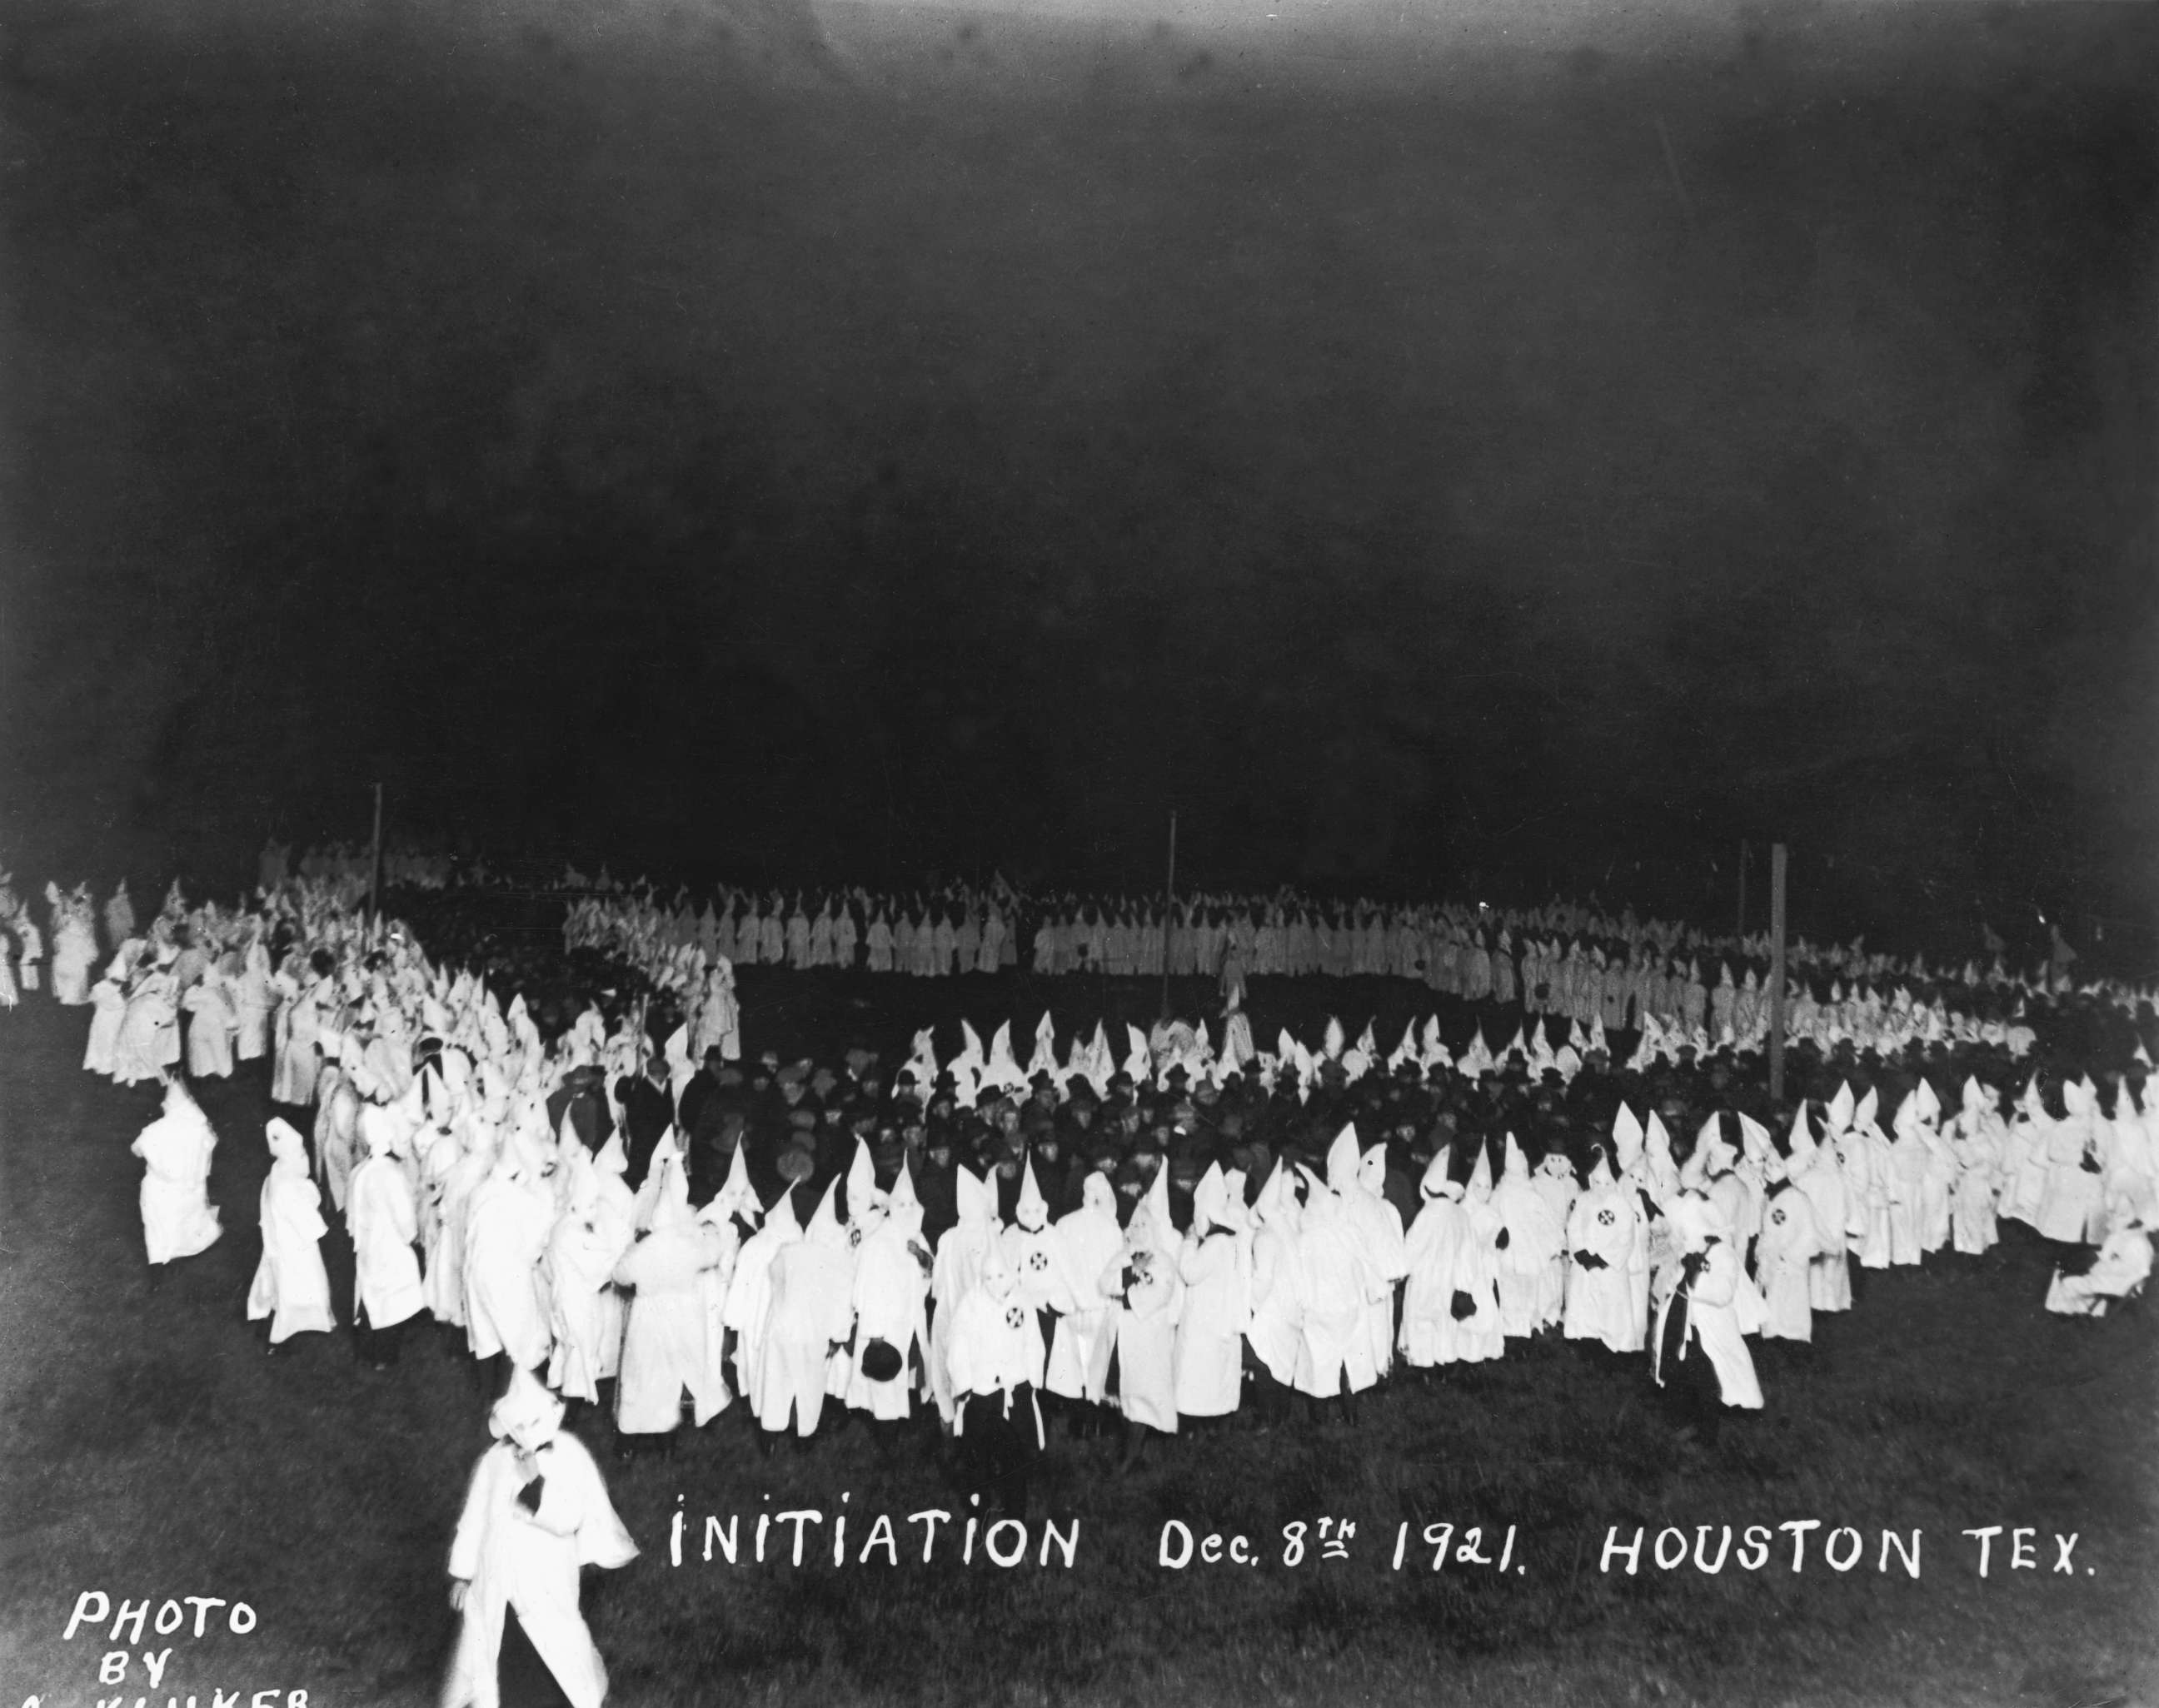 PHOTO: People gather for a Ku Klux Klan initiation in Houston, Dec. 8, 1921.